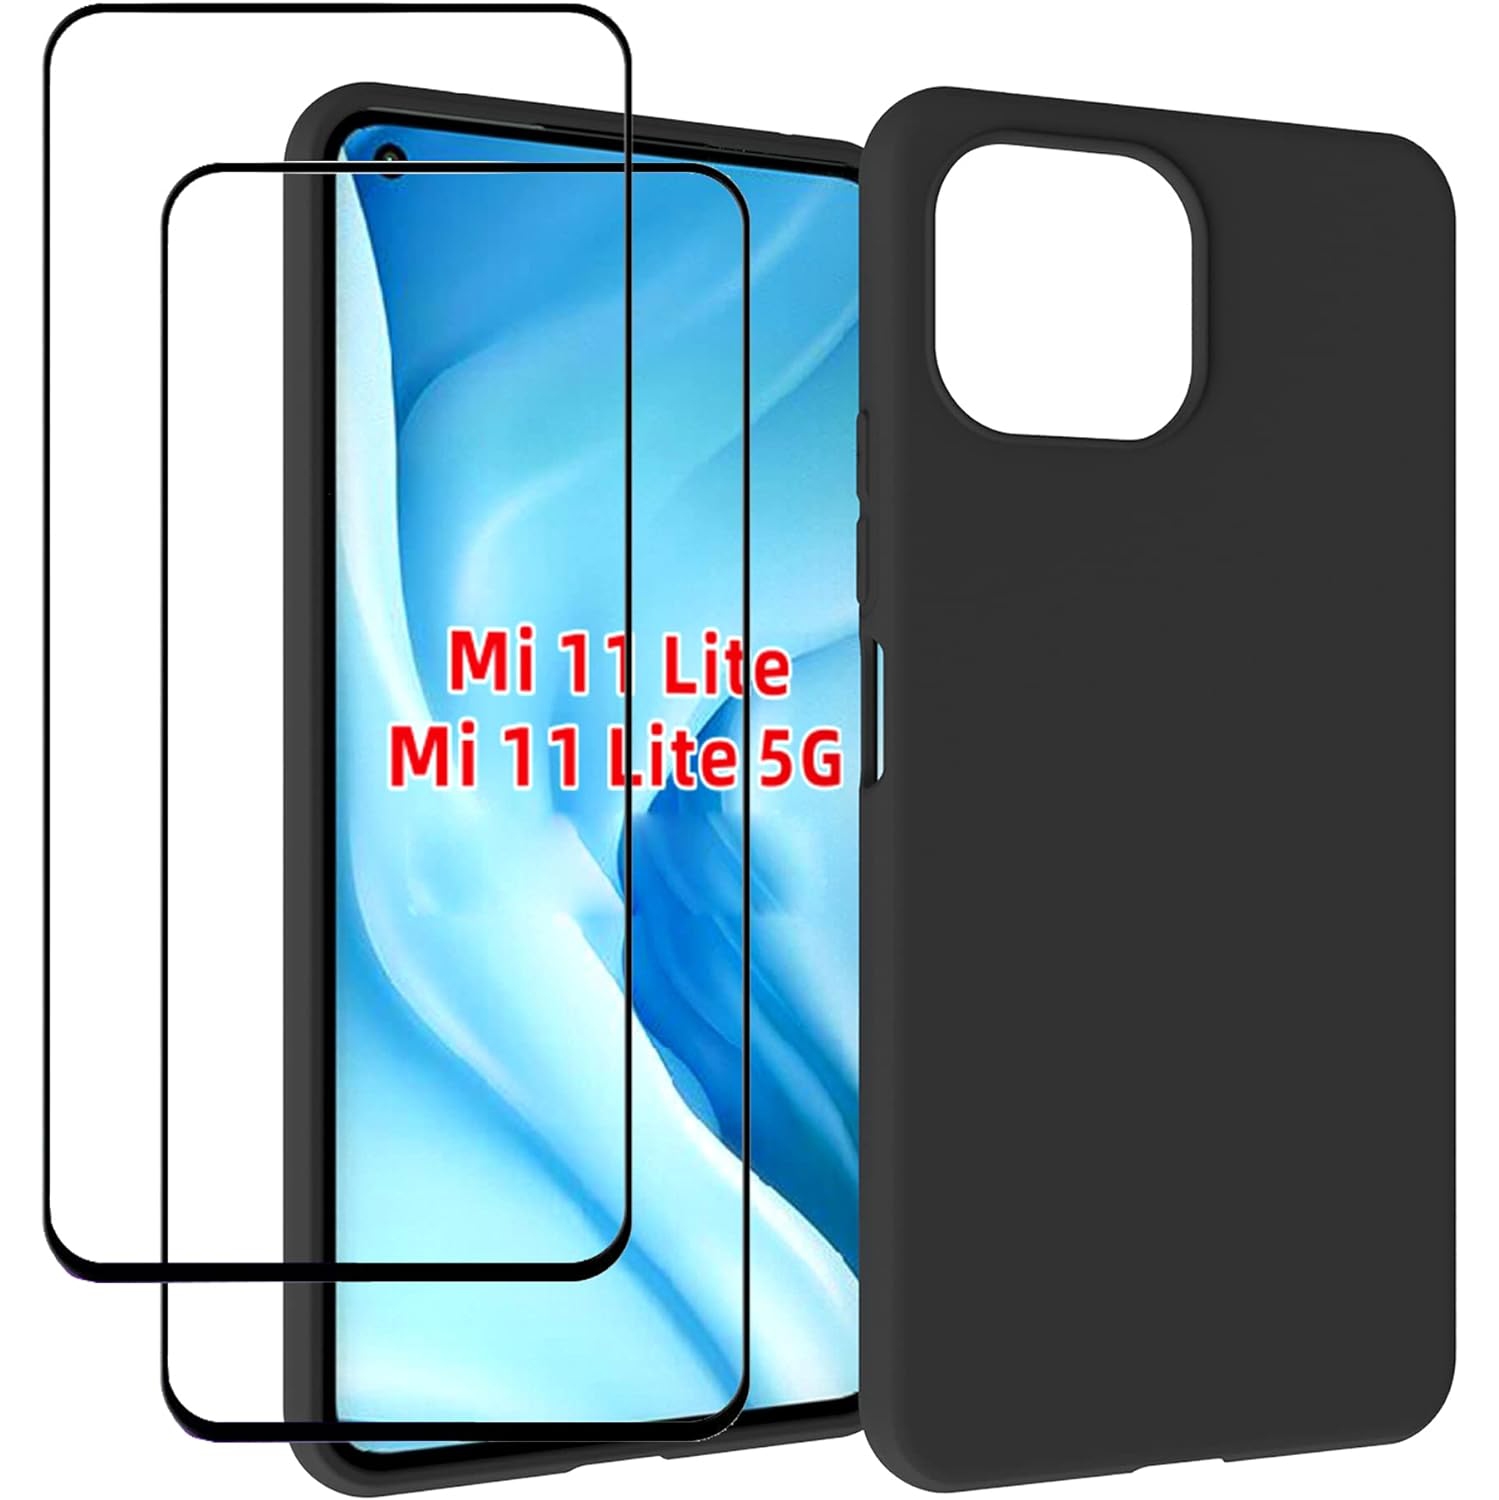 ZMONE for Xiaomi Mi 11 Lite 4G5G Case with Tempered Glass Screen Protector [2 Pack] Slim Fit Soft Flexible TPU